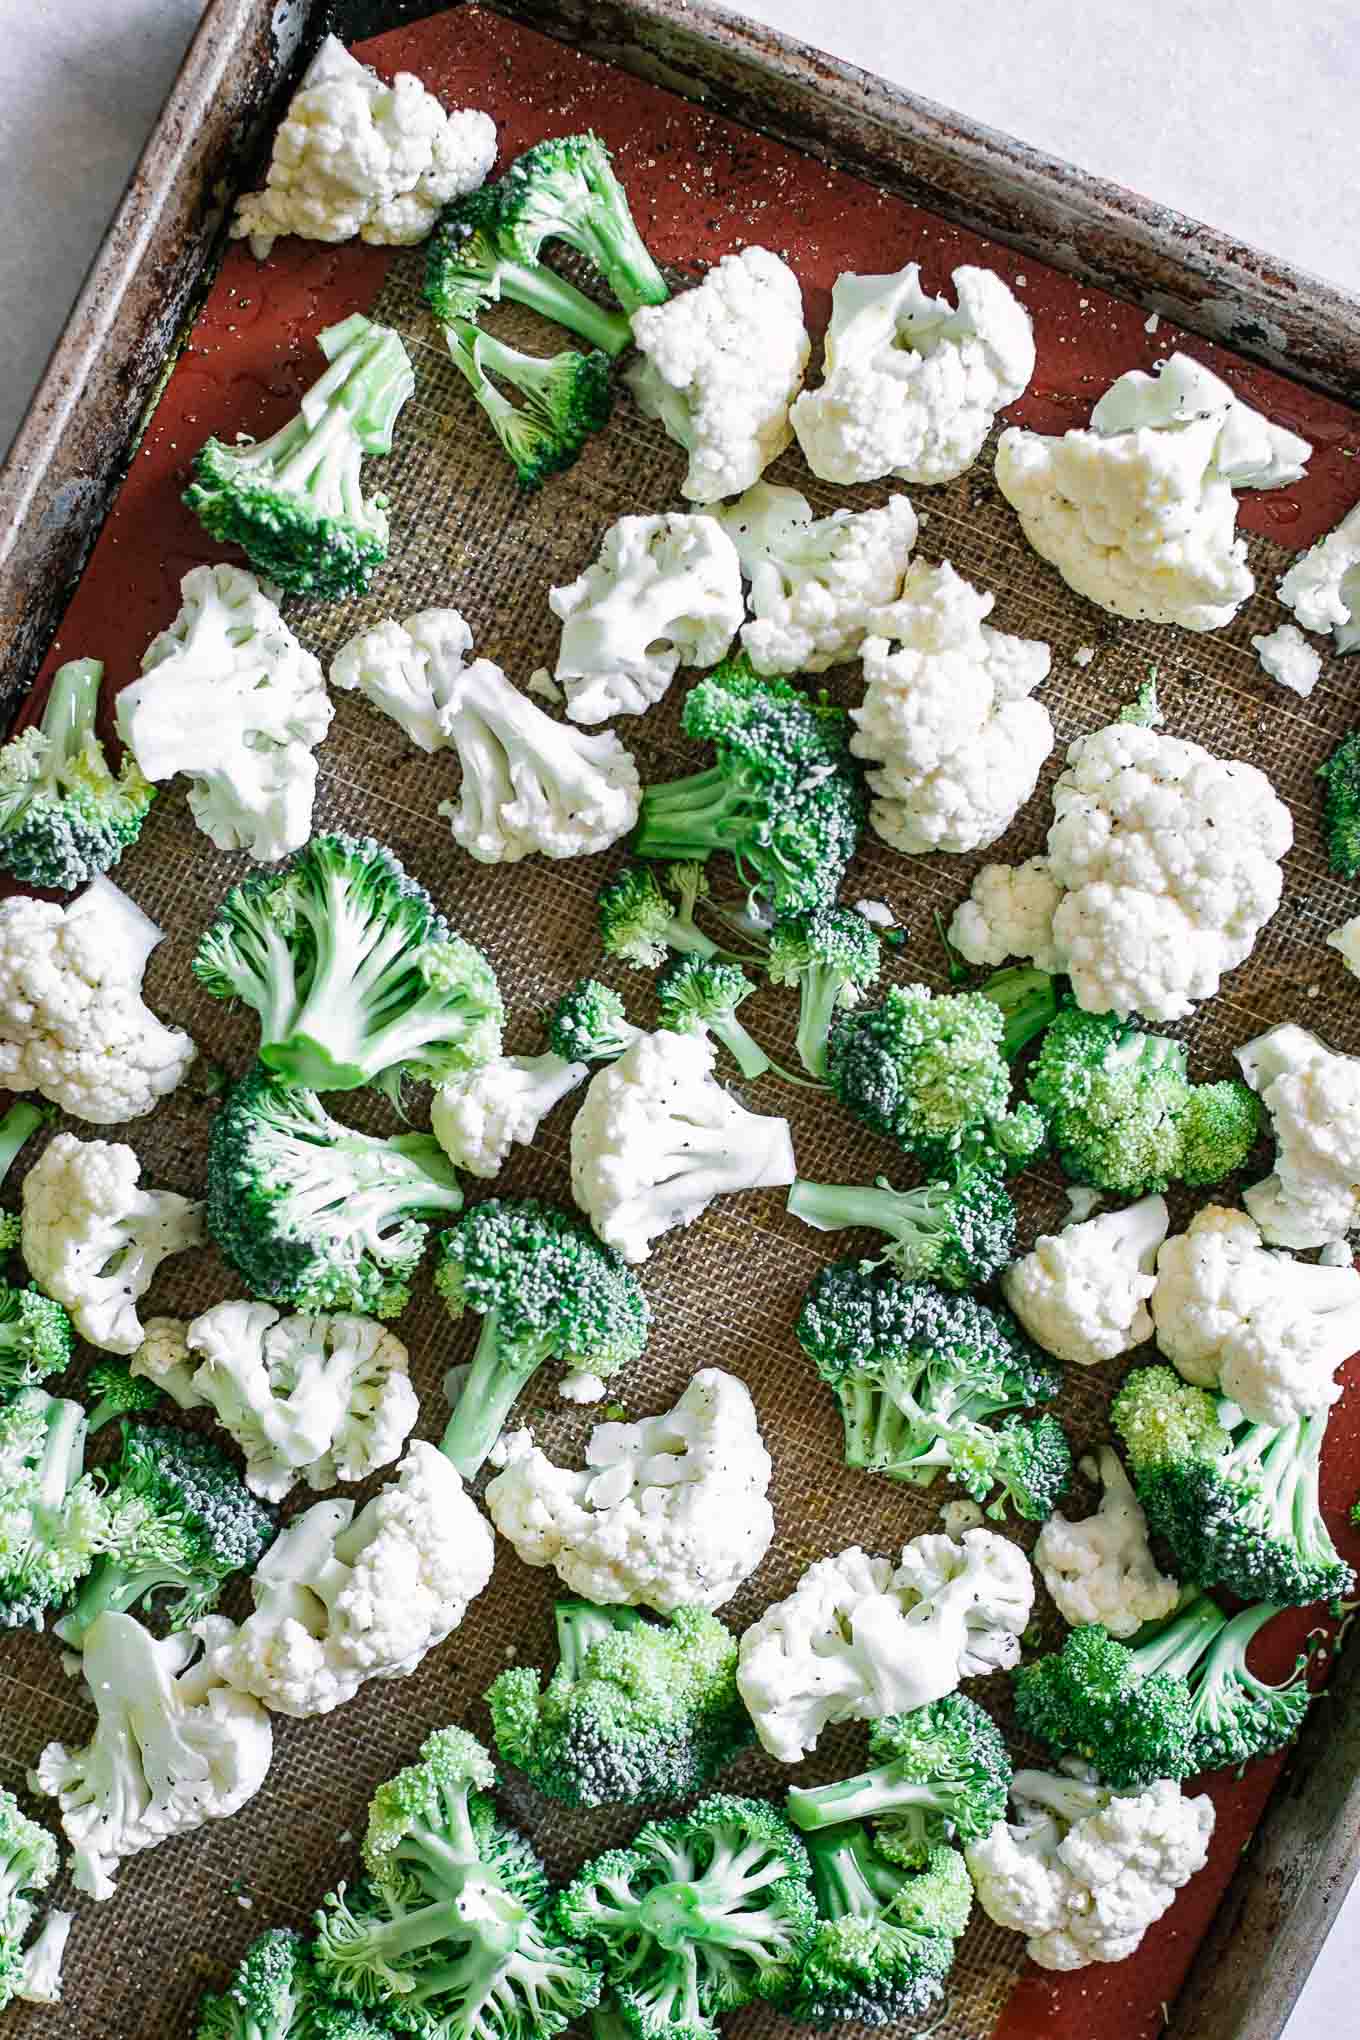 cauliflower and broccoli on a baking sheet before roasting